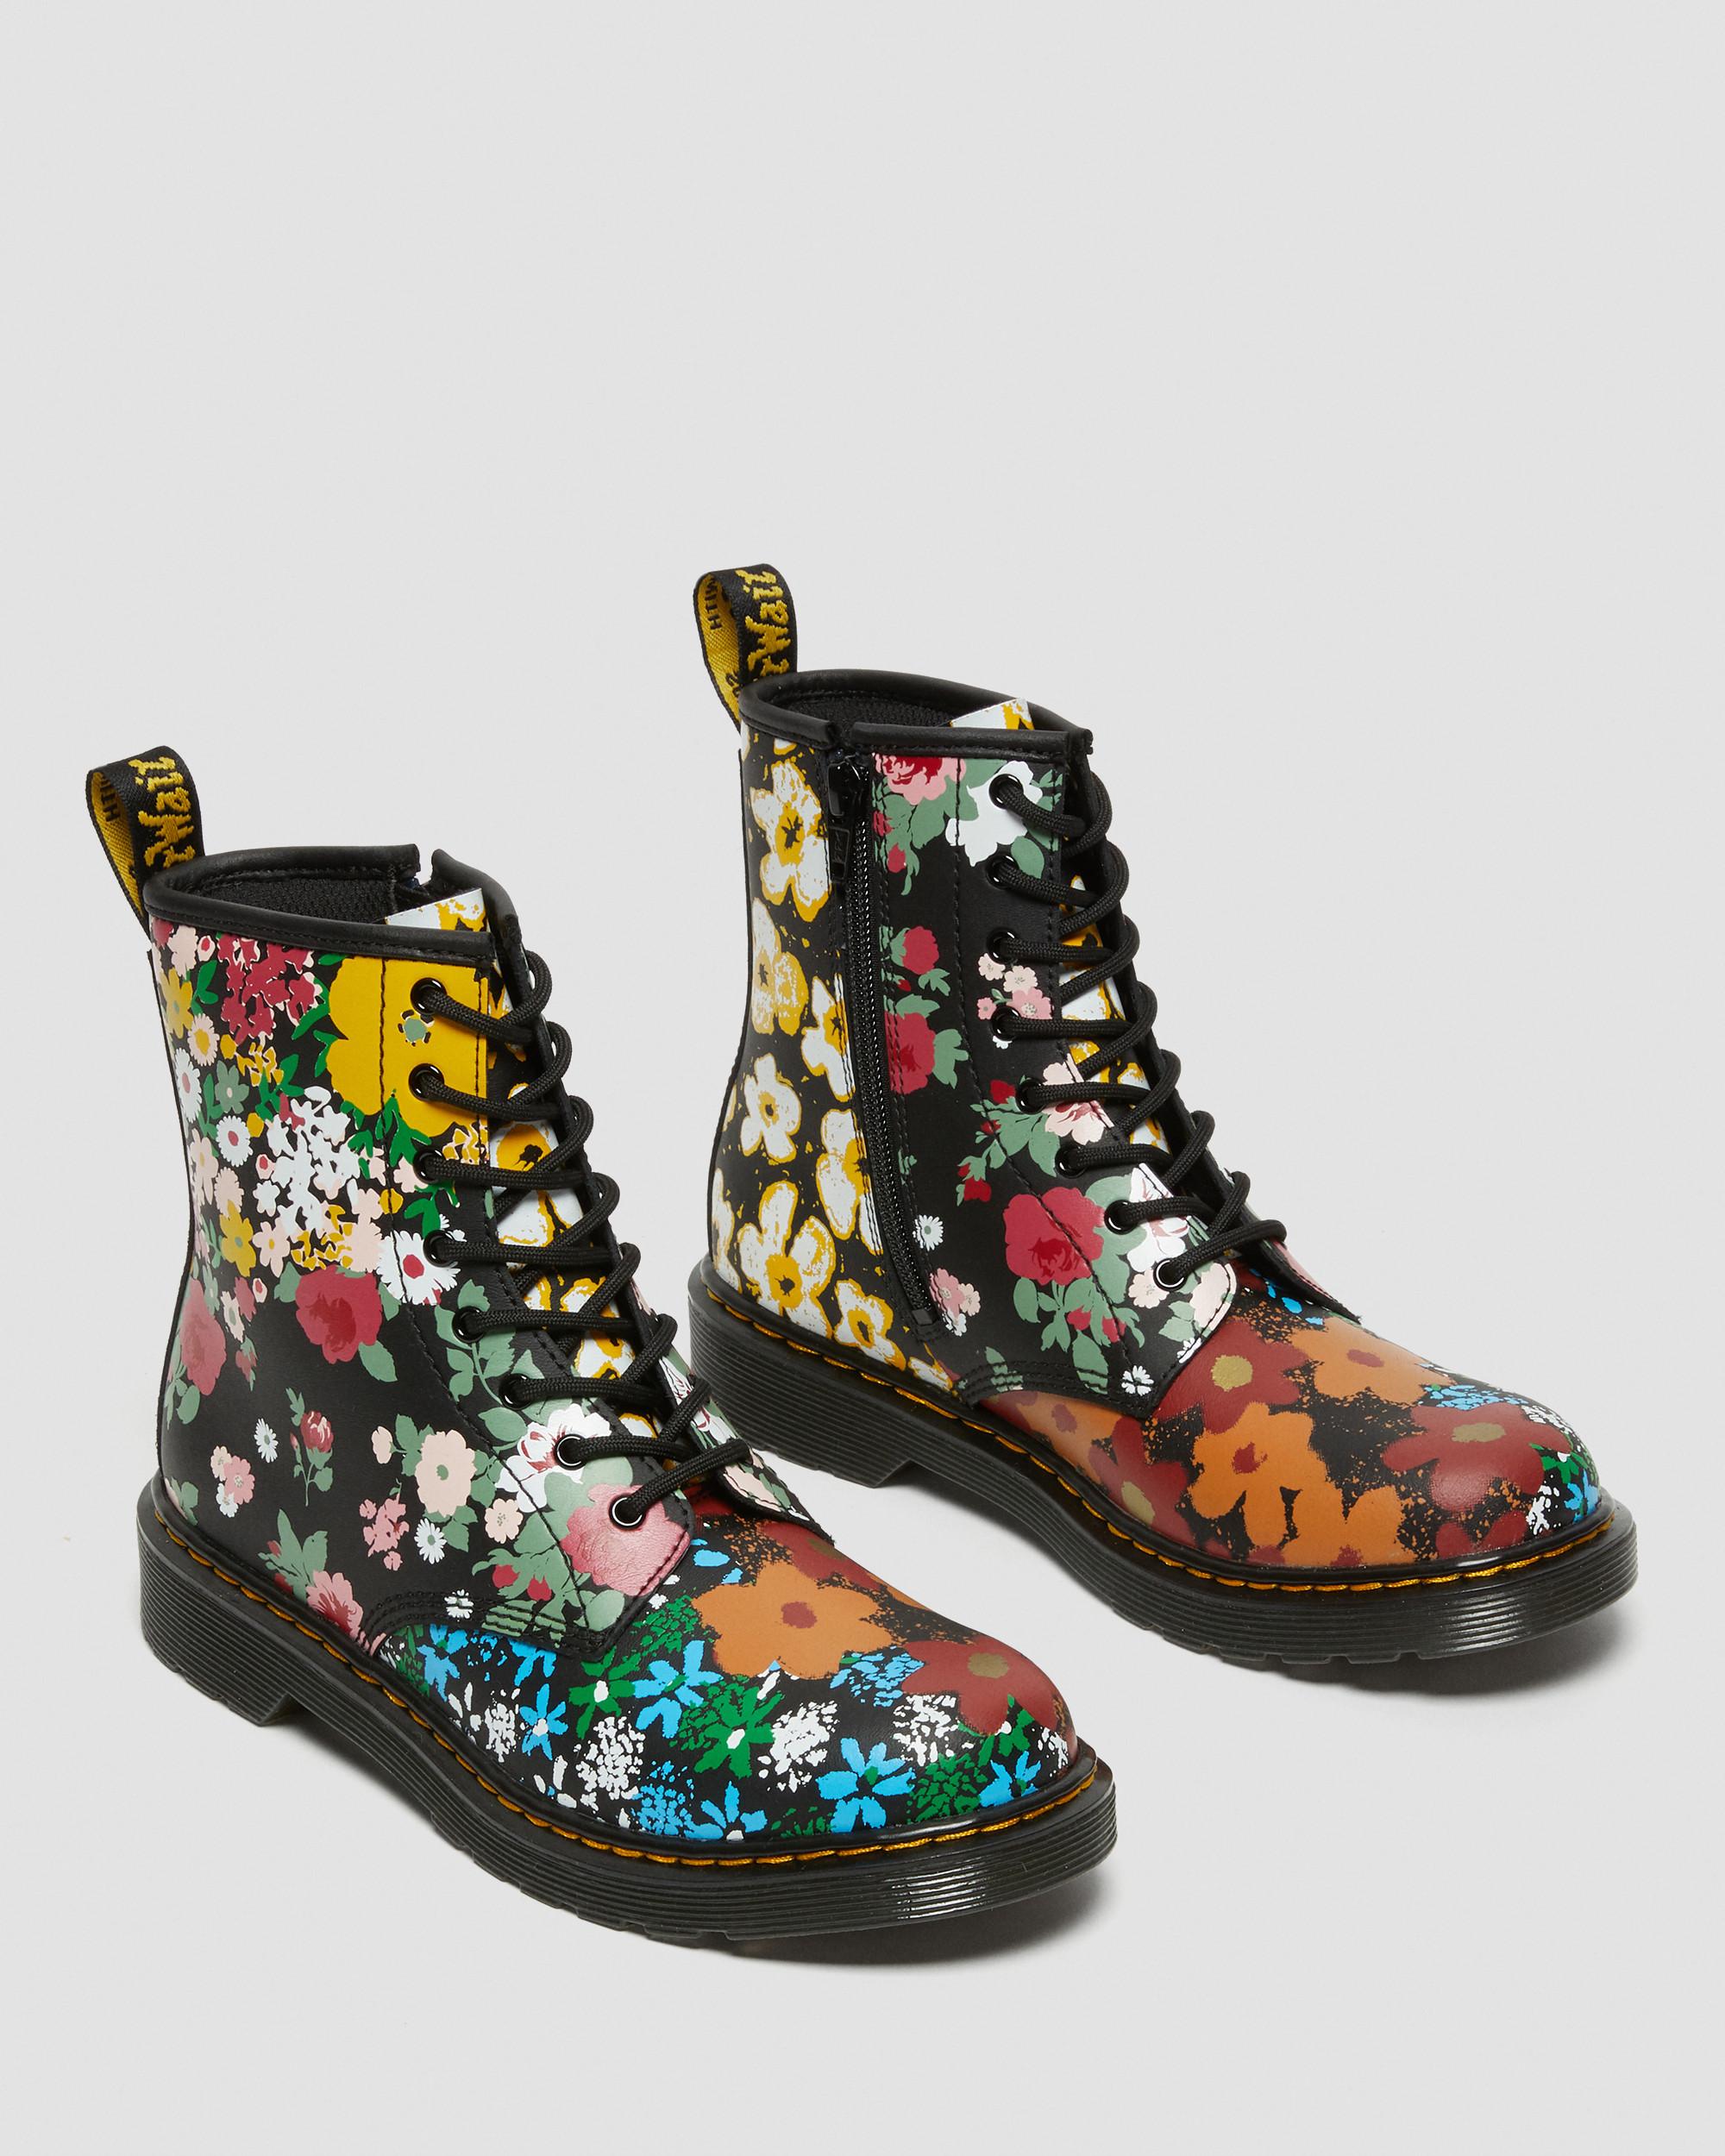 Up Youth Mash Lace Martens Leather in Floral Boots Dr. 1460 | Black Up